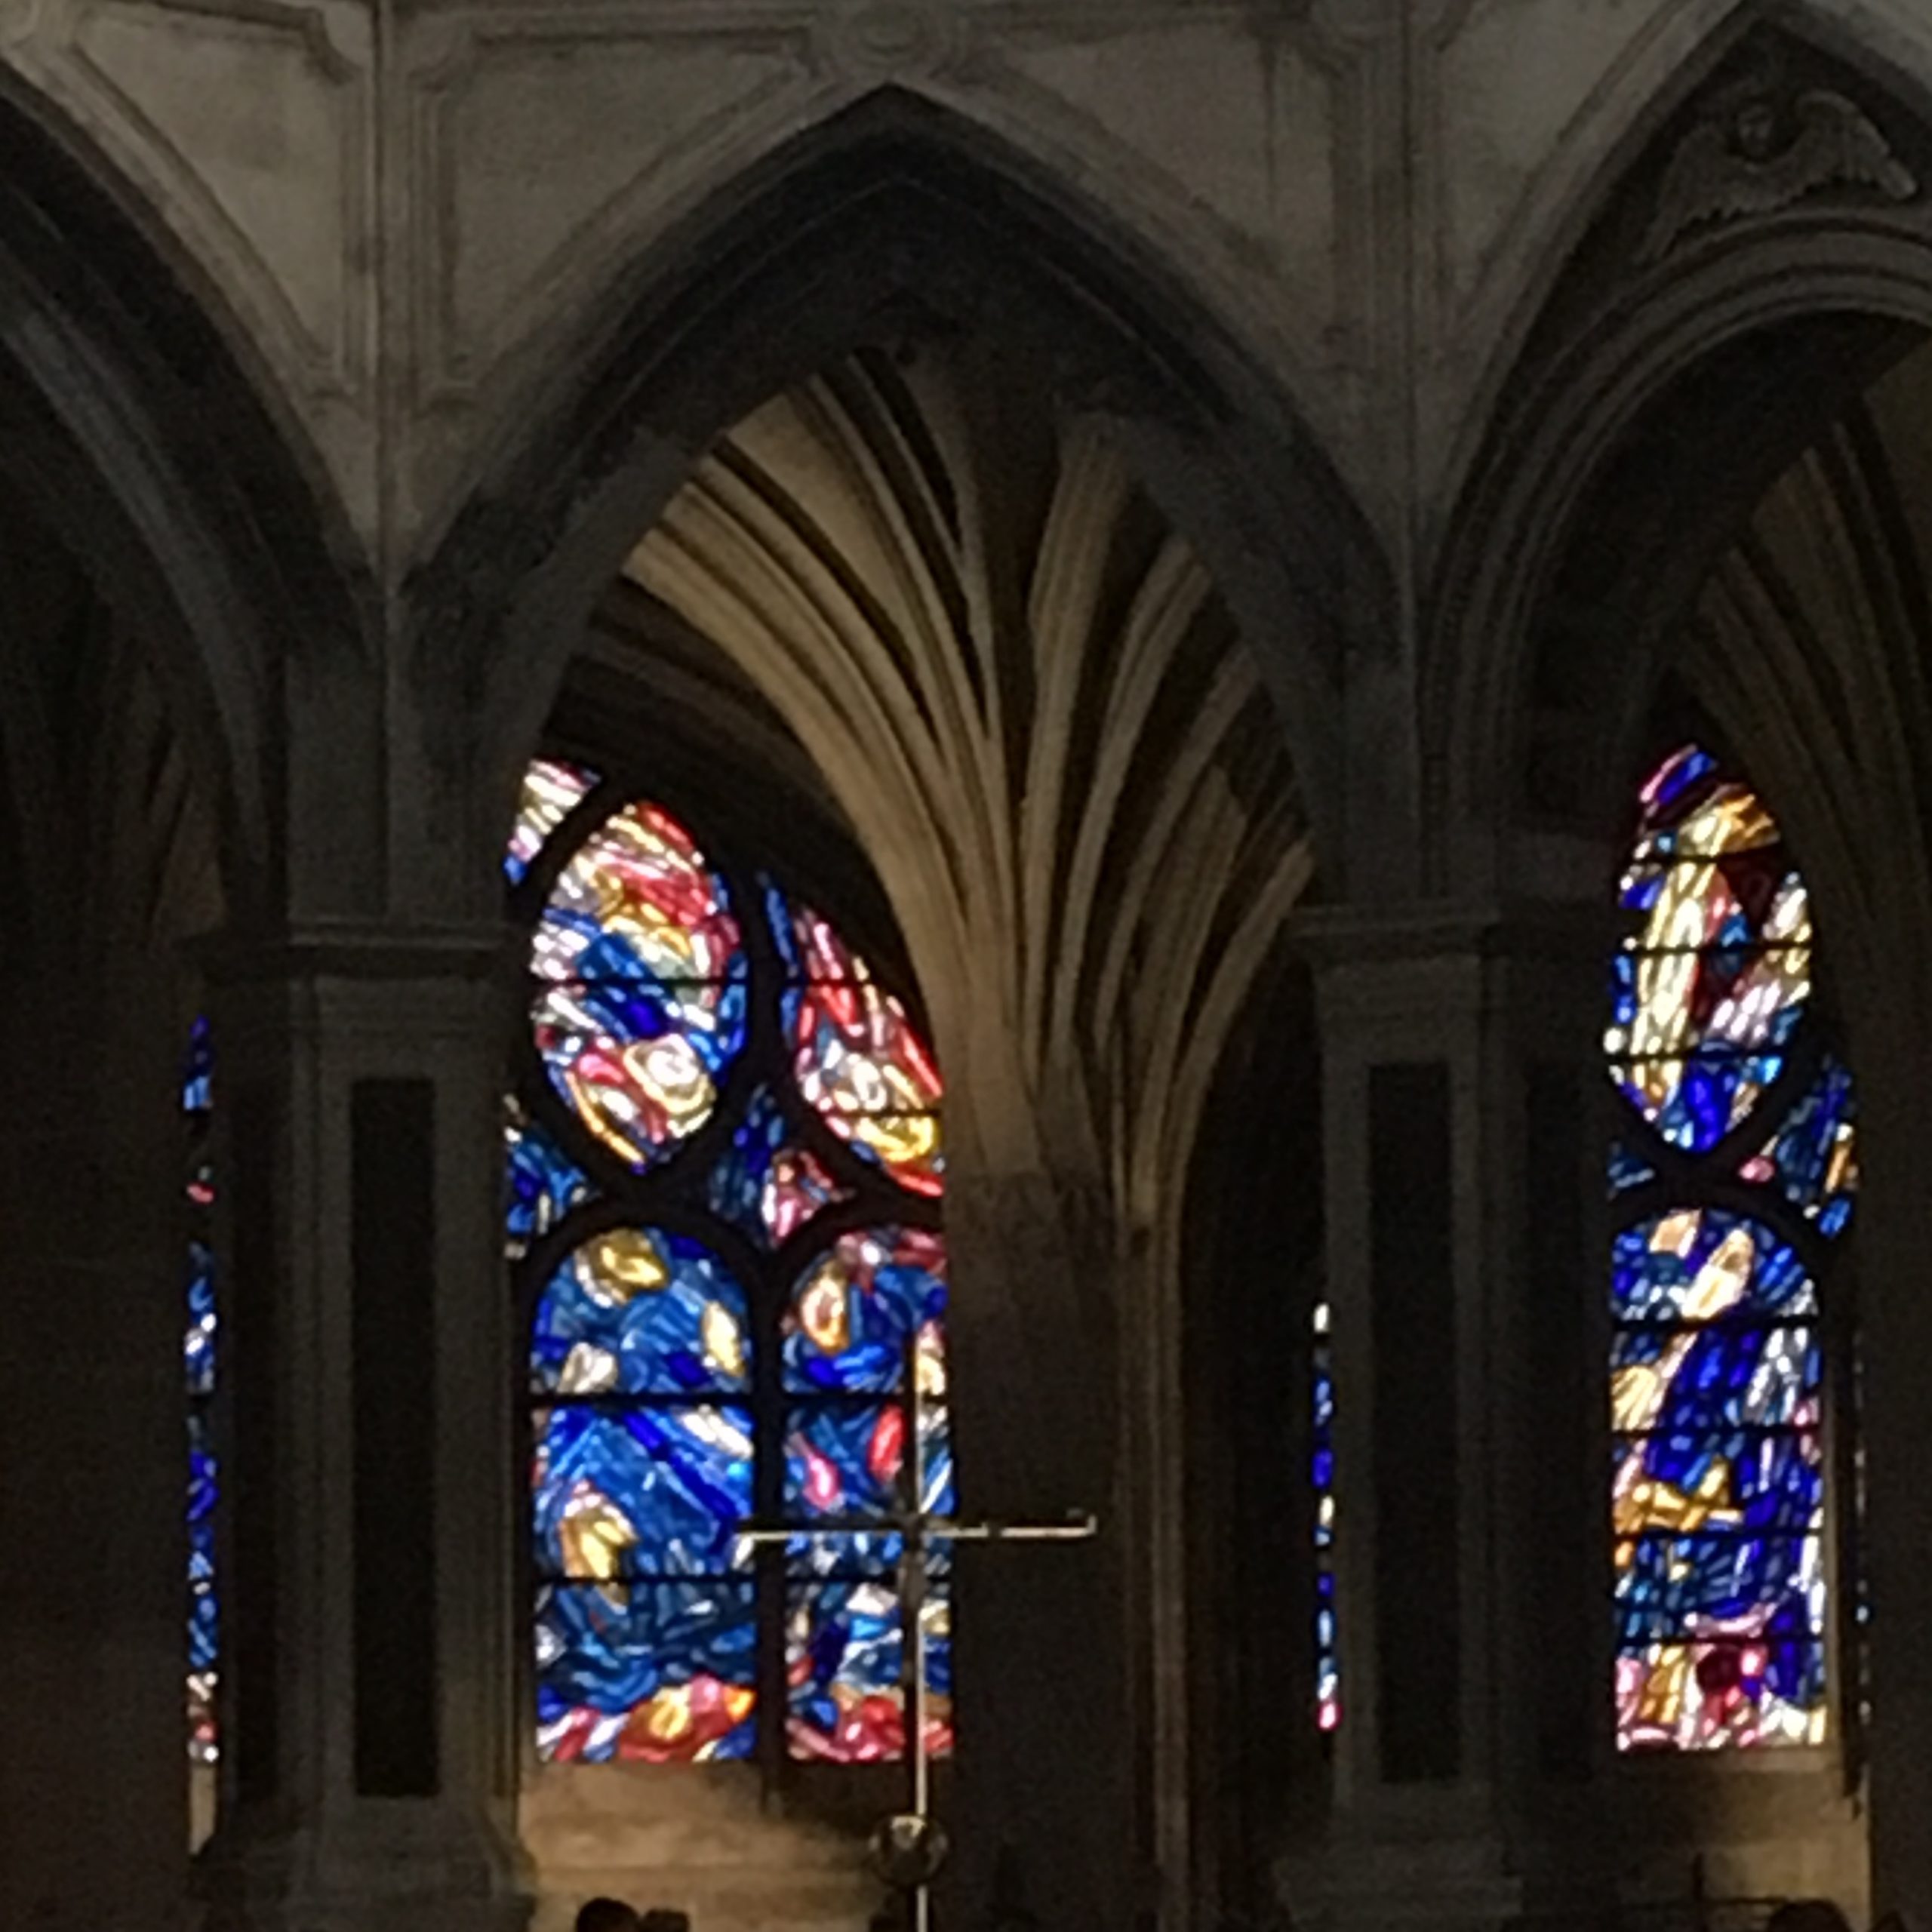 stained glass windows inside a church